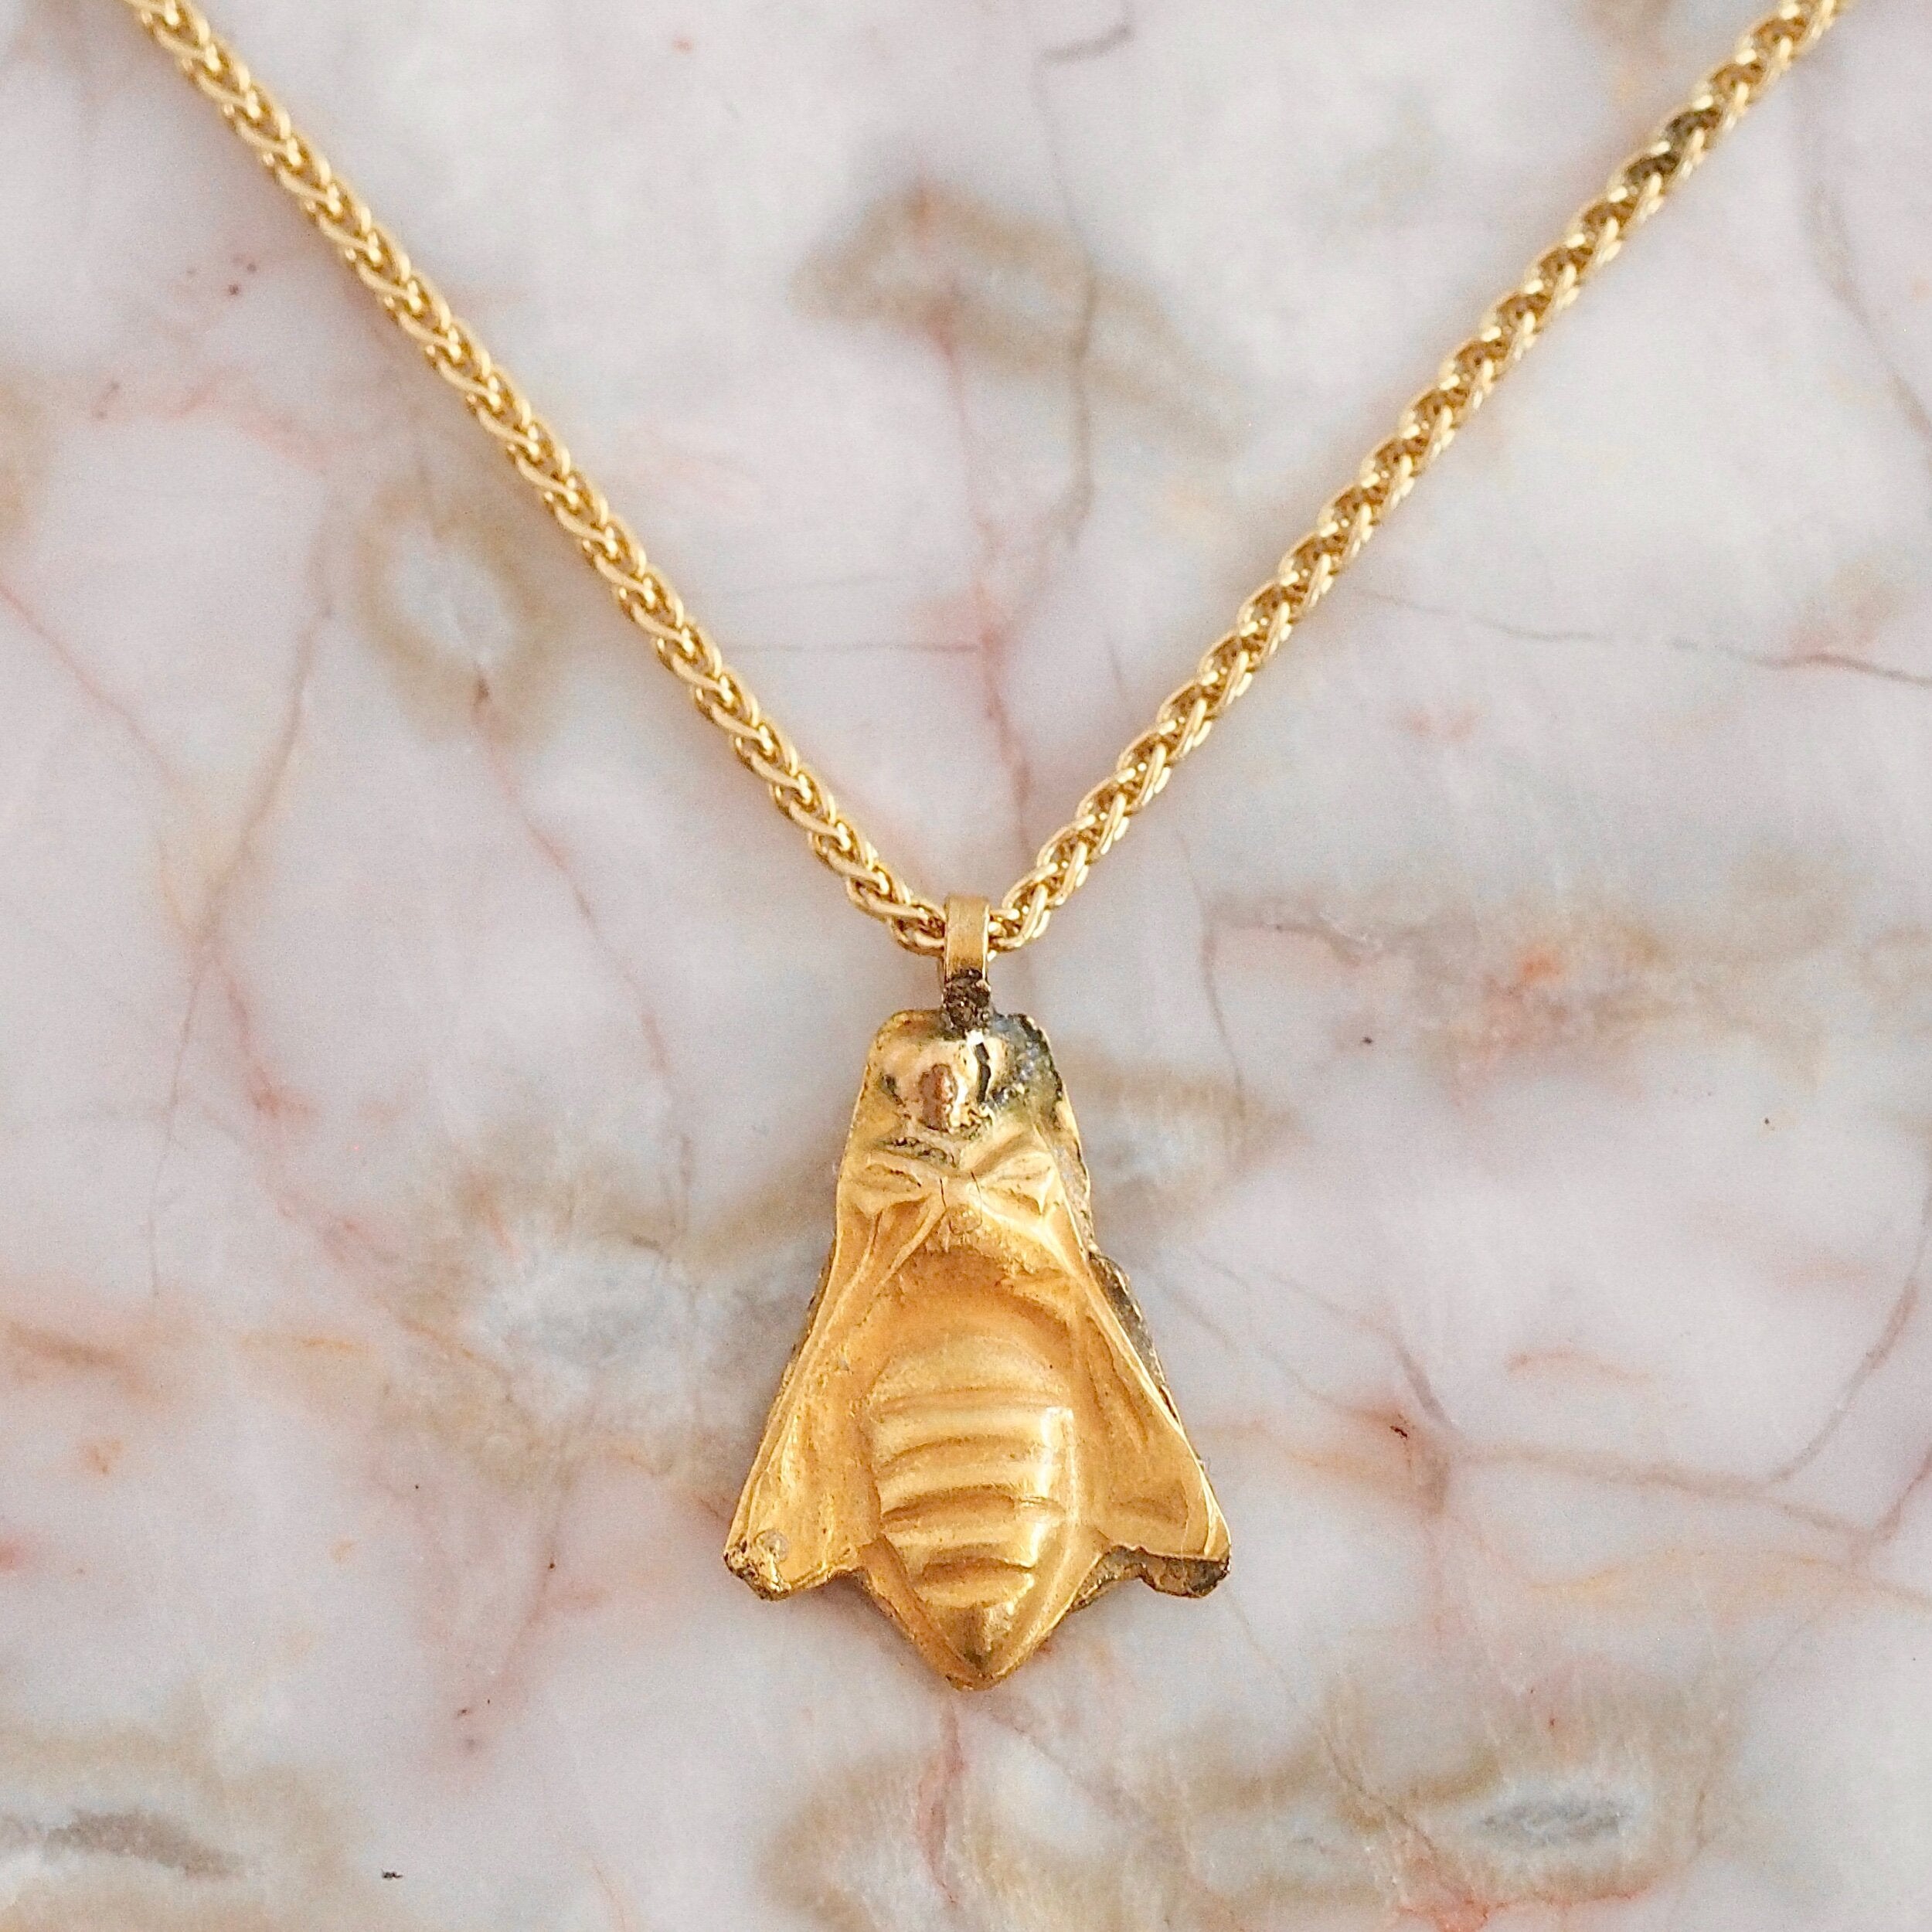 Ancient 18k Gold Bee on 10k Gold Wheat Chain Necklace